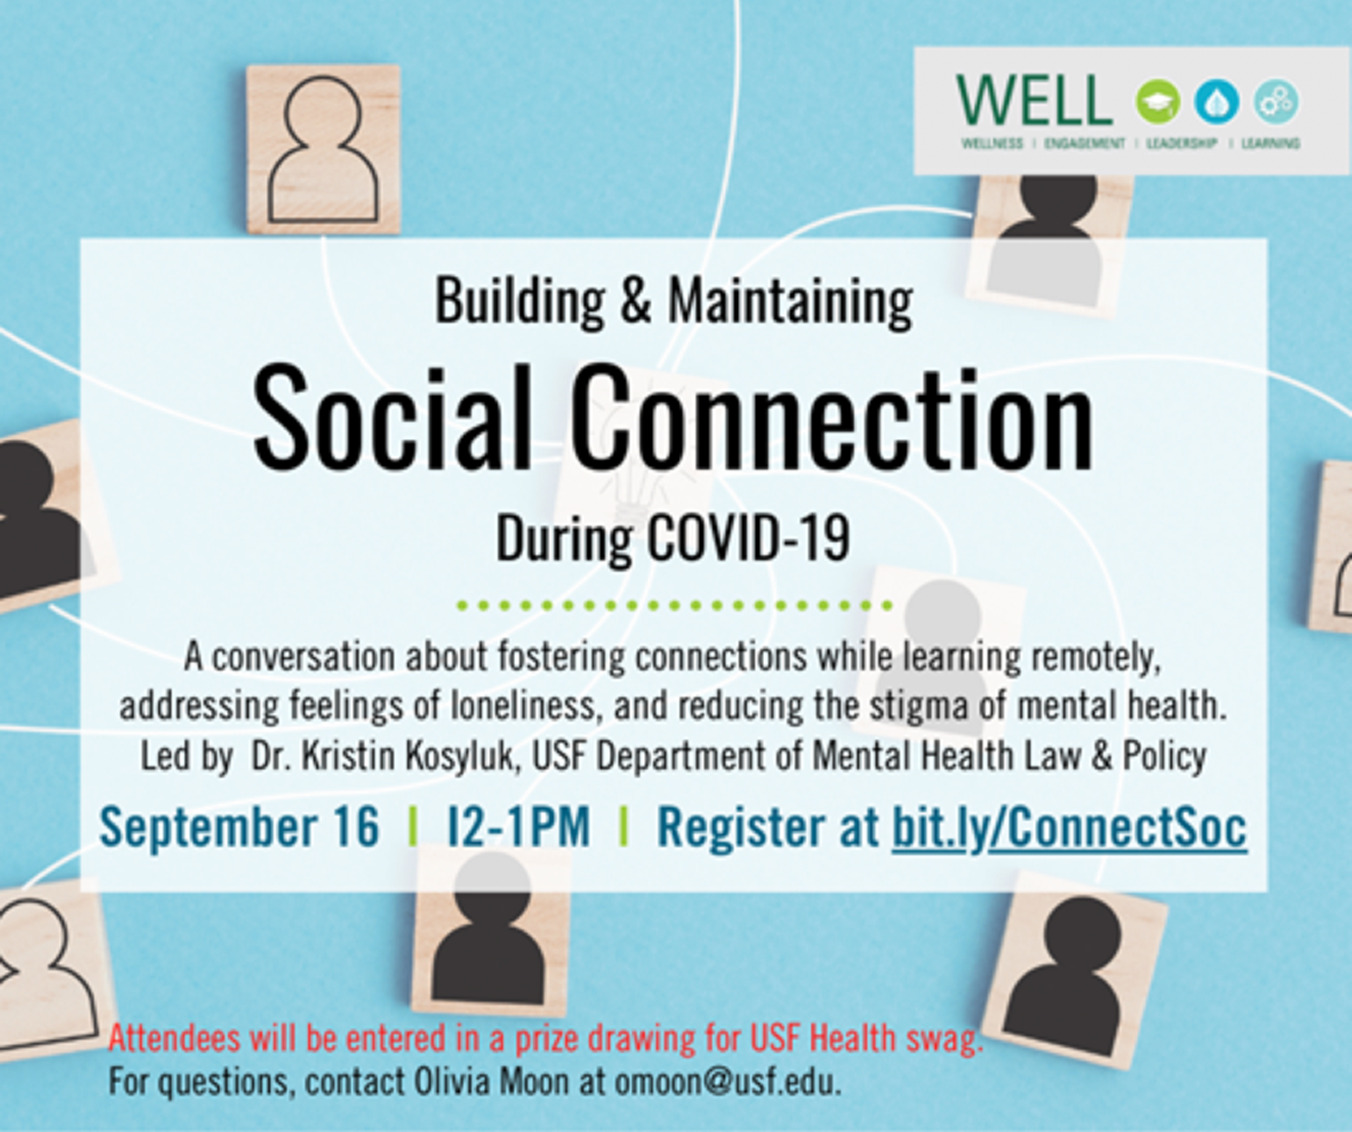 Social Connection During COVID-19 announcement